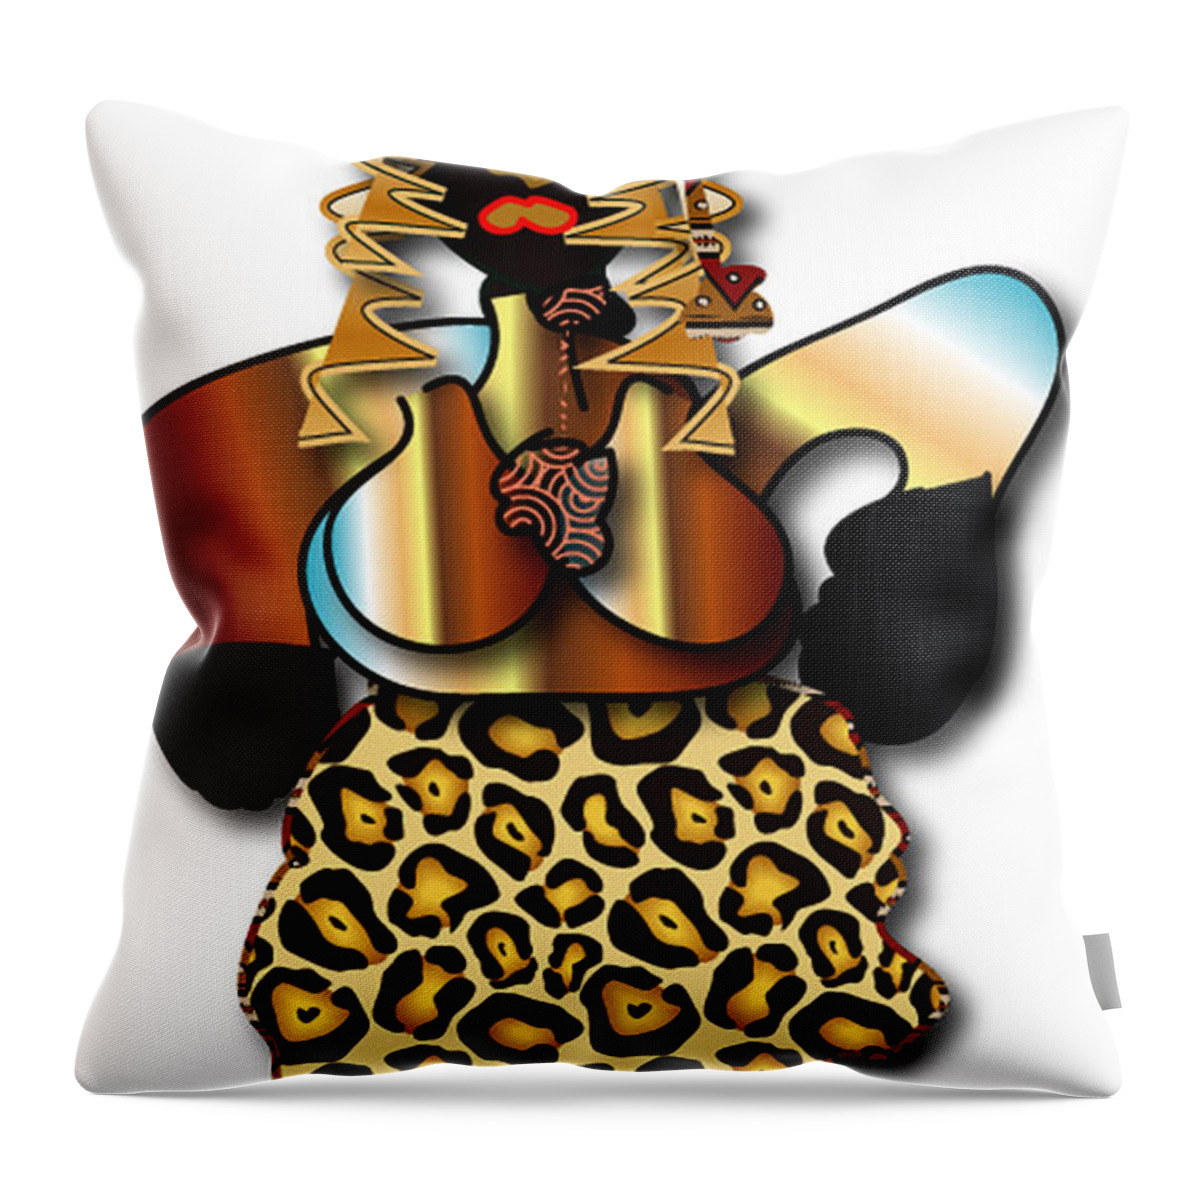 African Dancers Throw Pillow featuring the digital art African Dancer 2 by Marvin Blaine